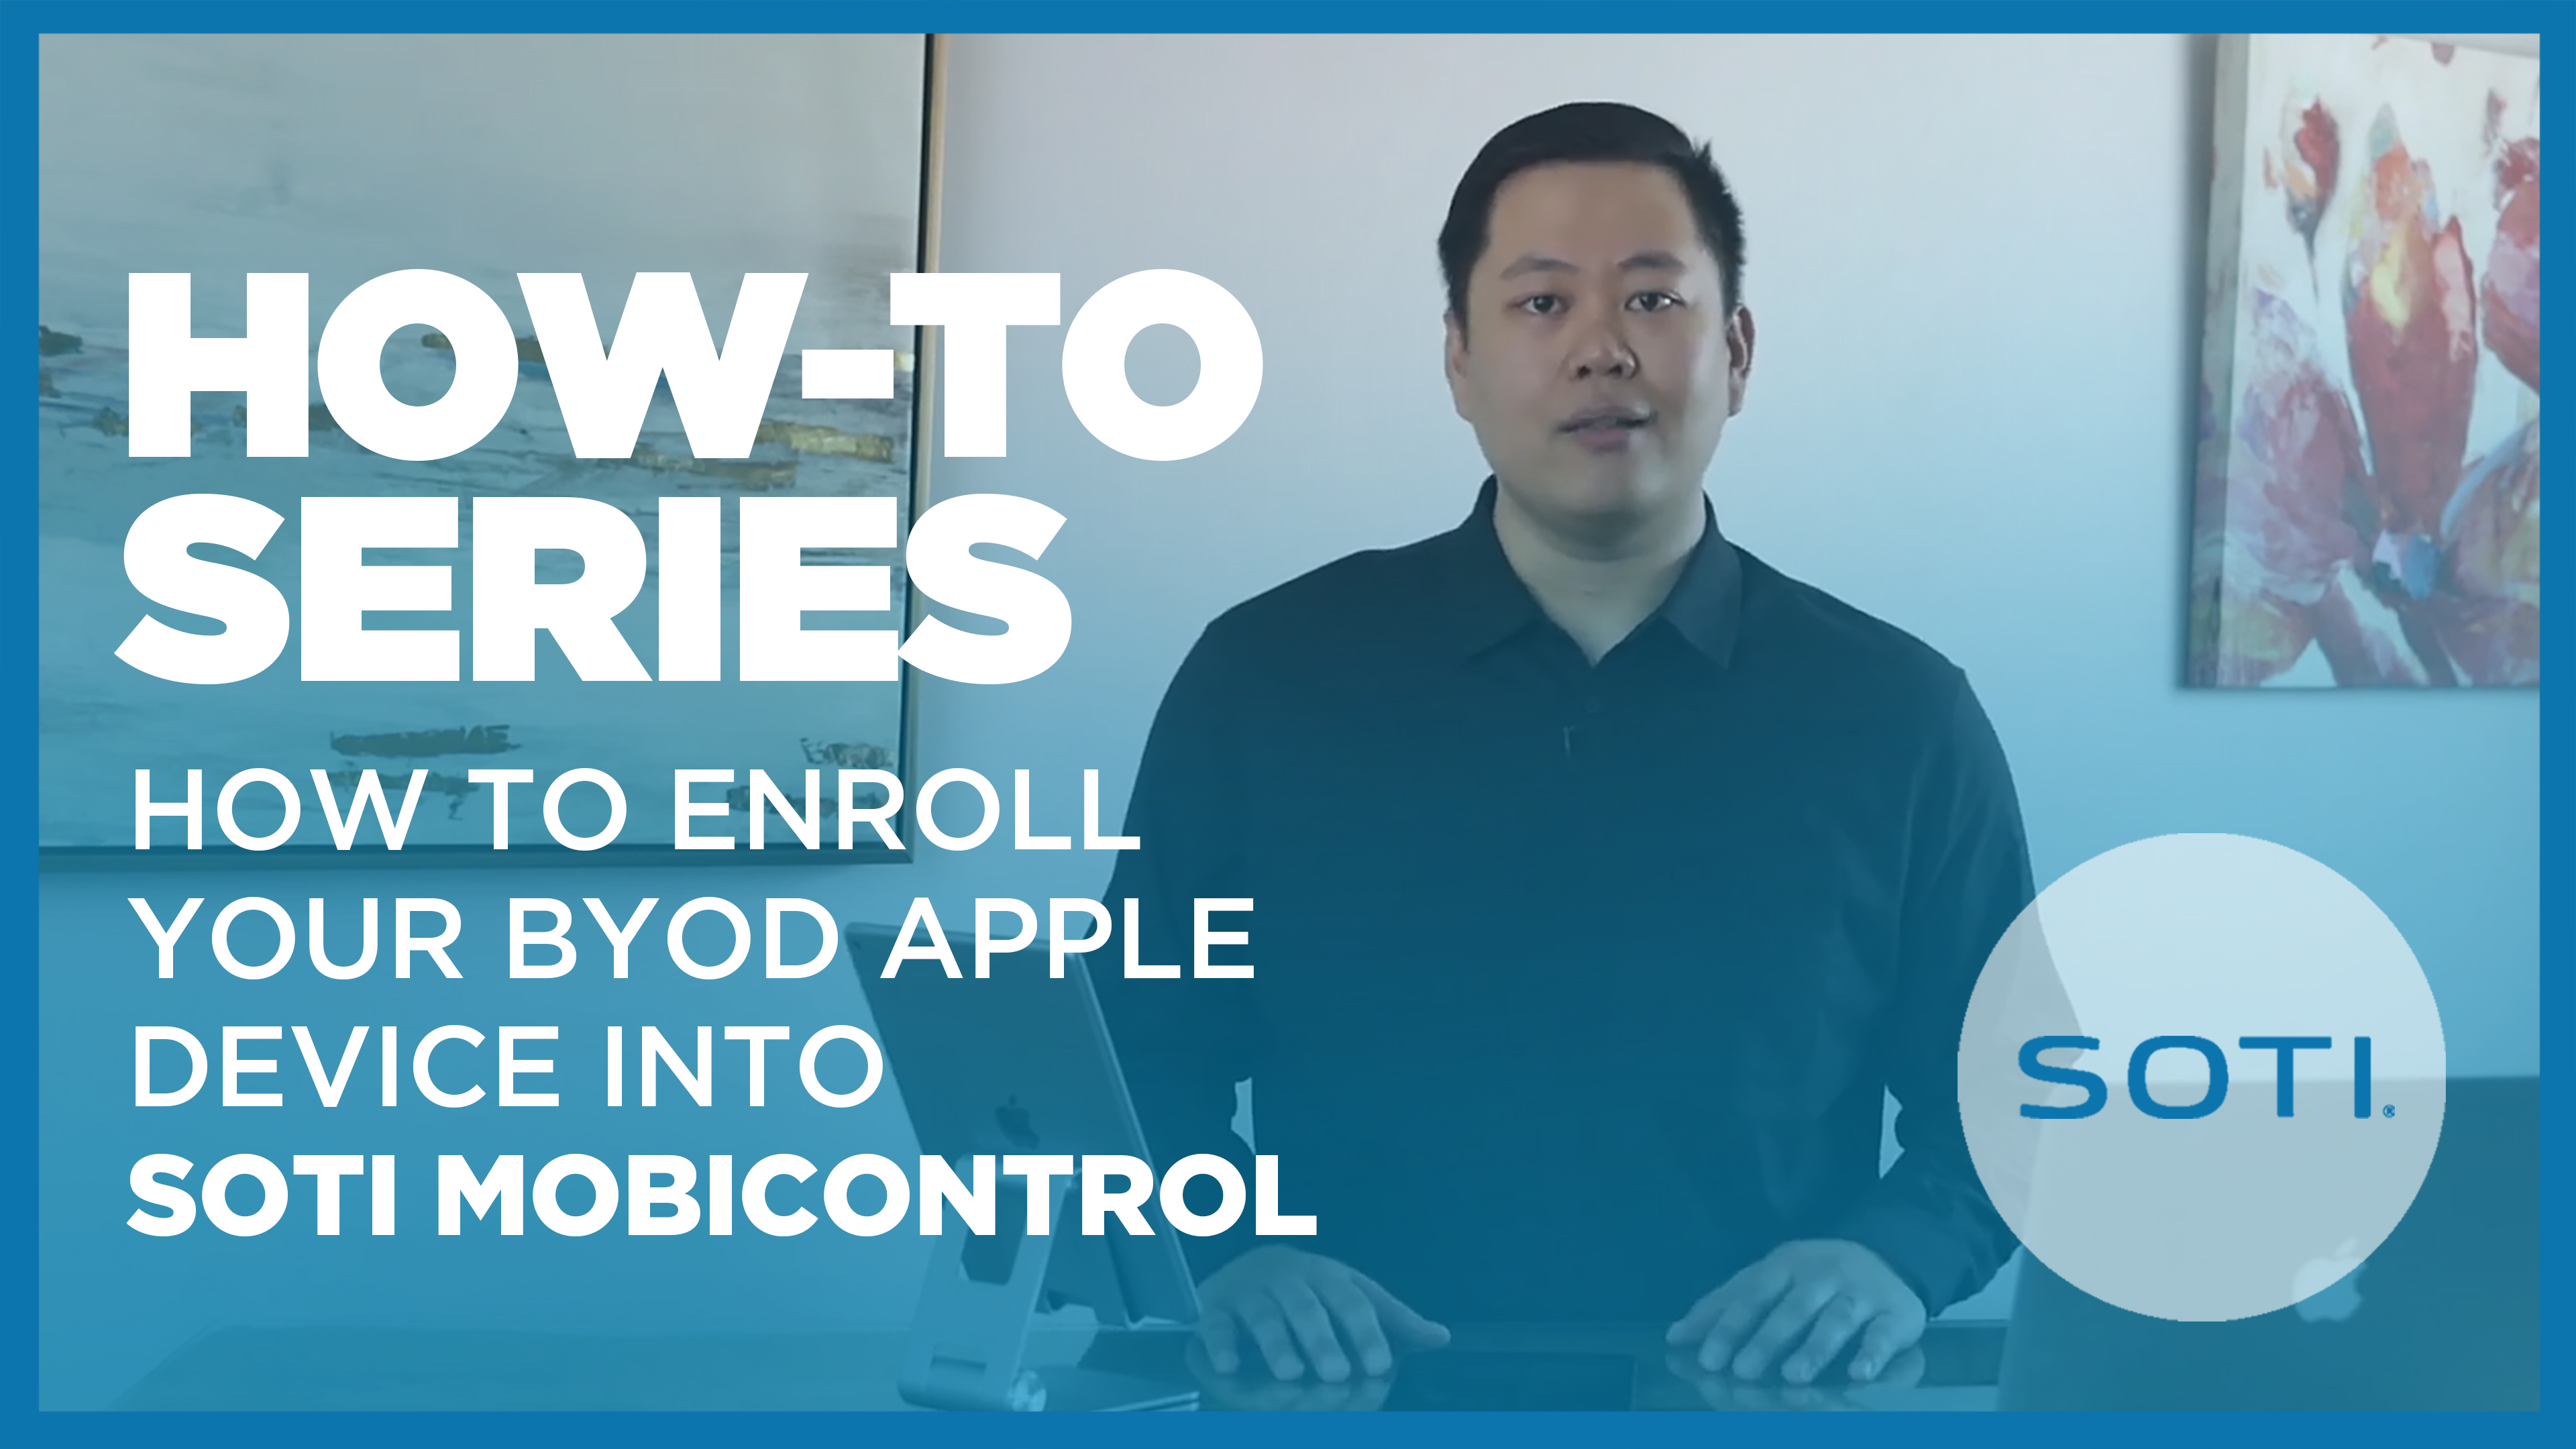 How To Enroll Your BYOD Apple Device into SOTI MobiControl Video